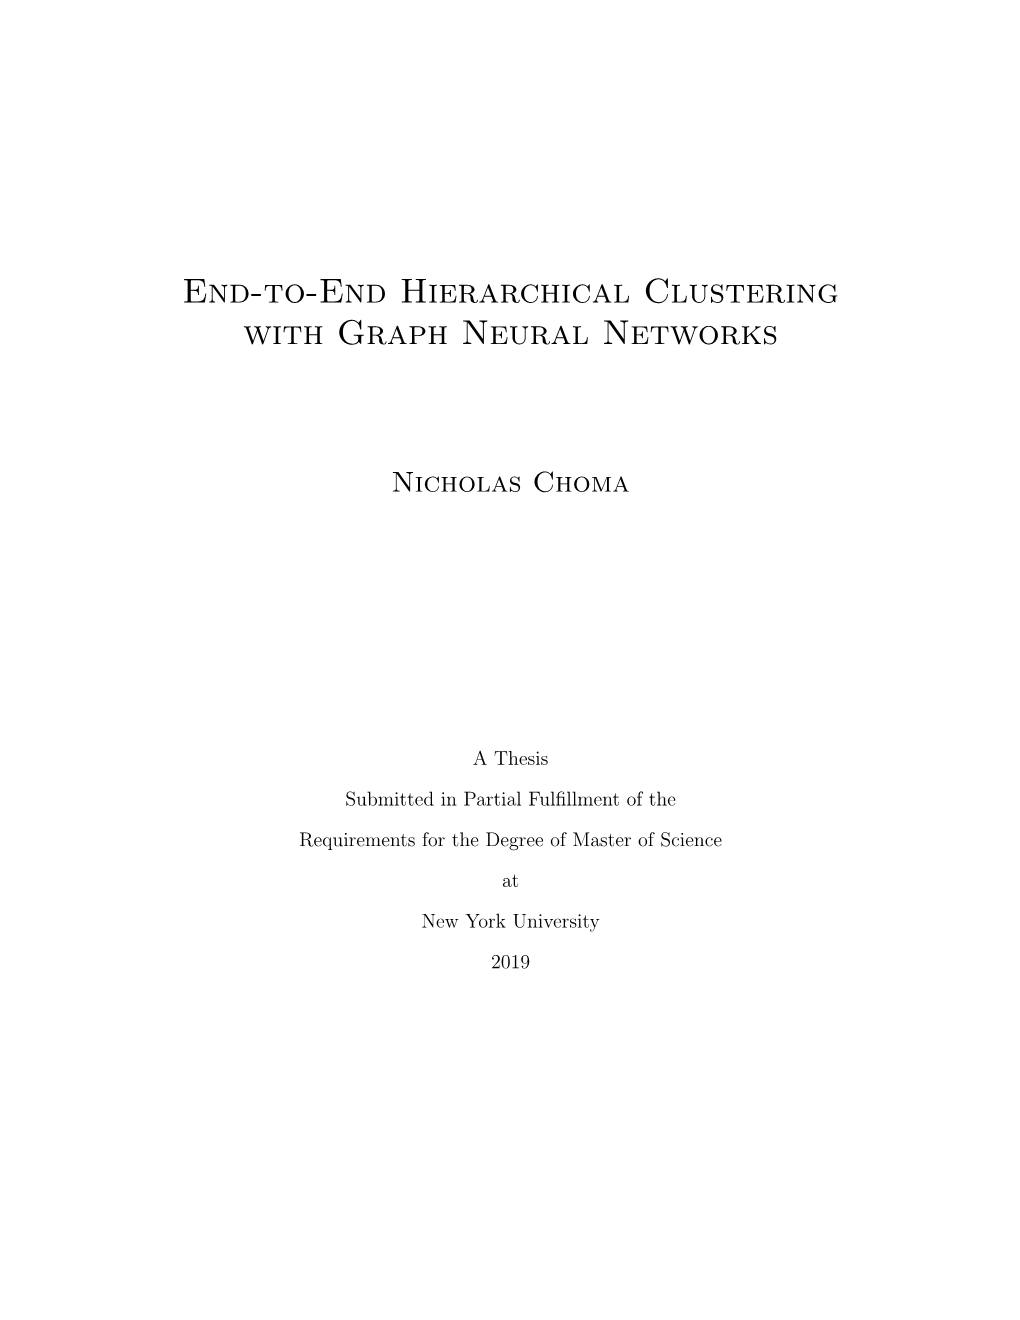 End-To-End Hierarchical Clustering with Graph Neural Networks